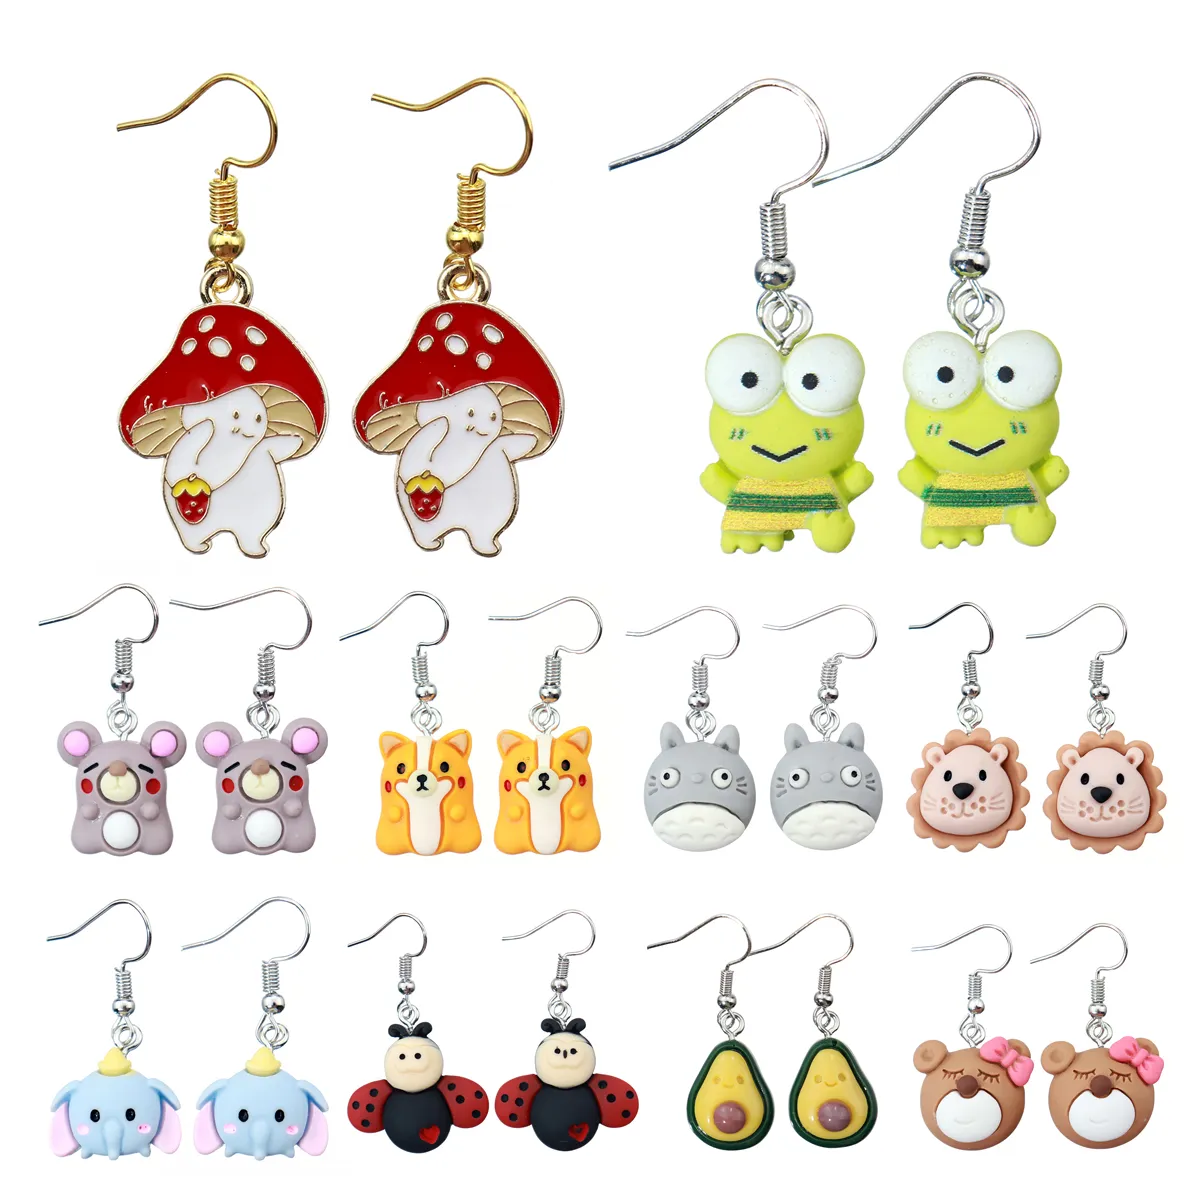 Charm Ins Creative Funny Green Frog Resin Drop earrings for Women Comed Cartoon Dangle Earring Children Personality Jewelry Gift Deliv Smth0